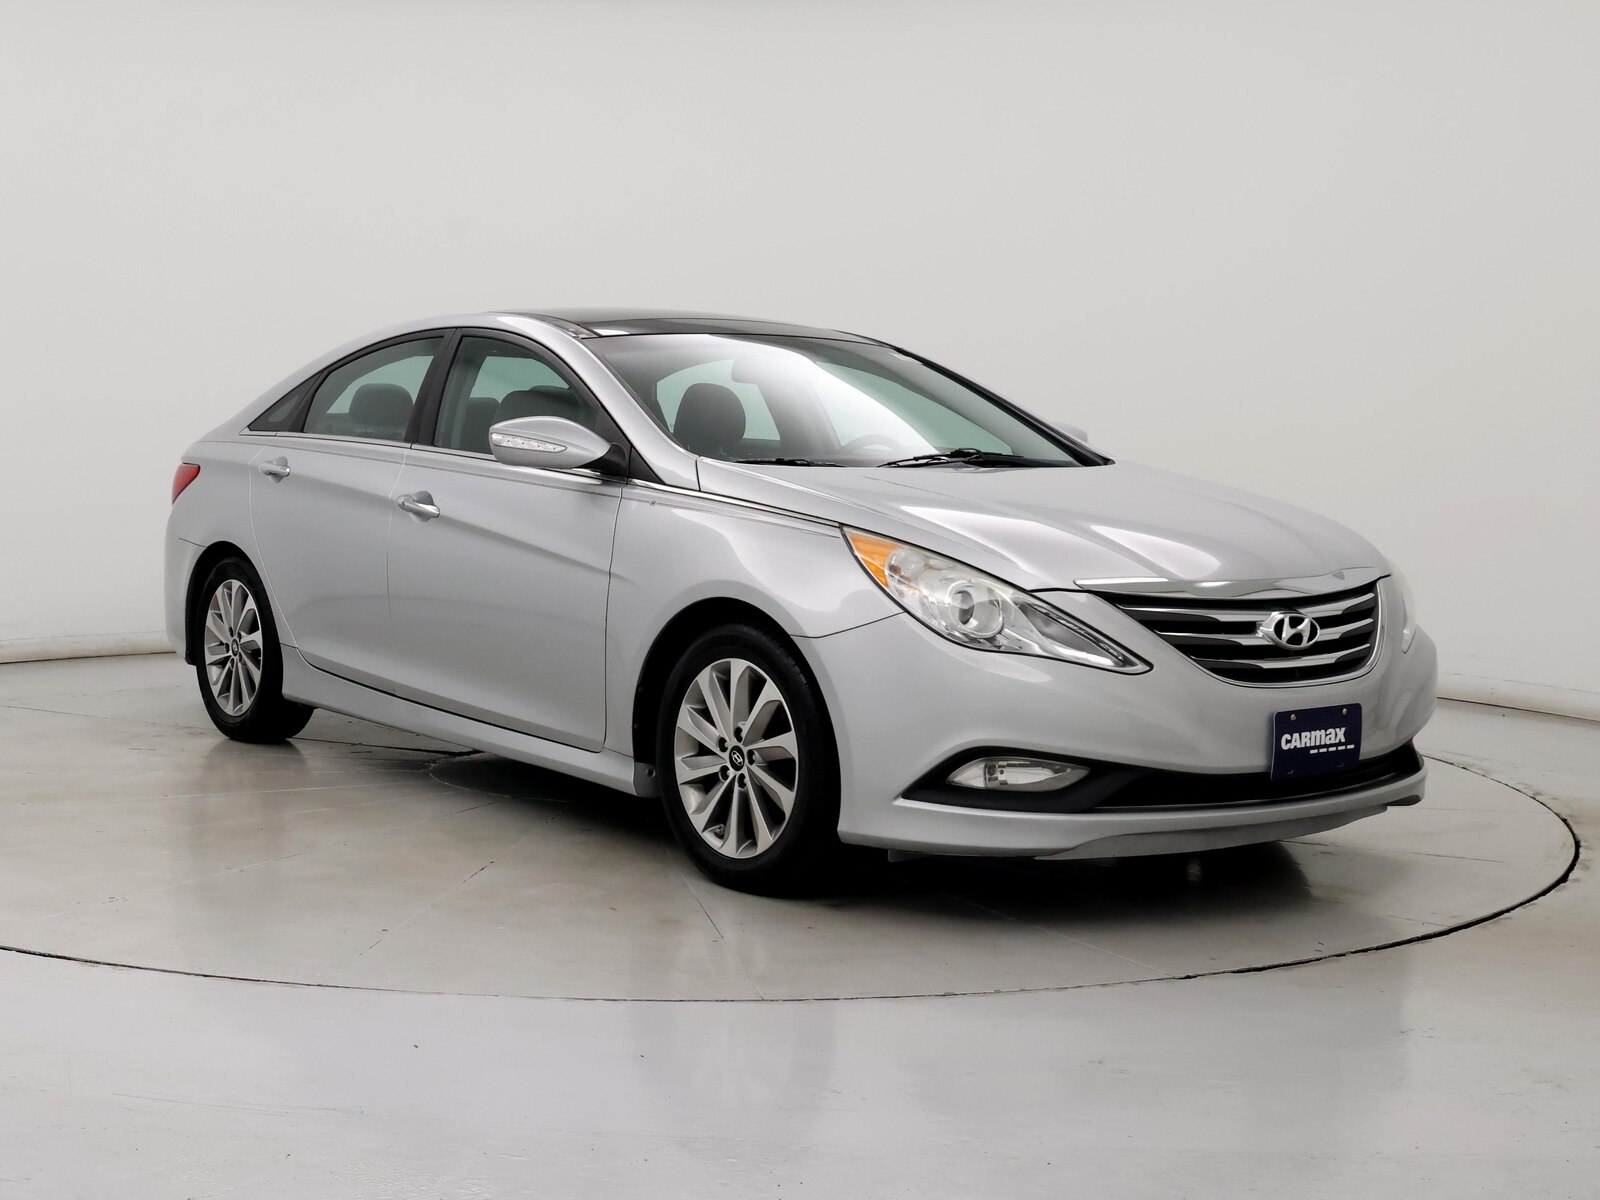 Used 2014 Hyundai Sonata Limited with VIN 5NPEC4ACXEH916501 for sale in Spokane Valley, WA